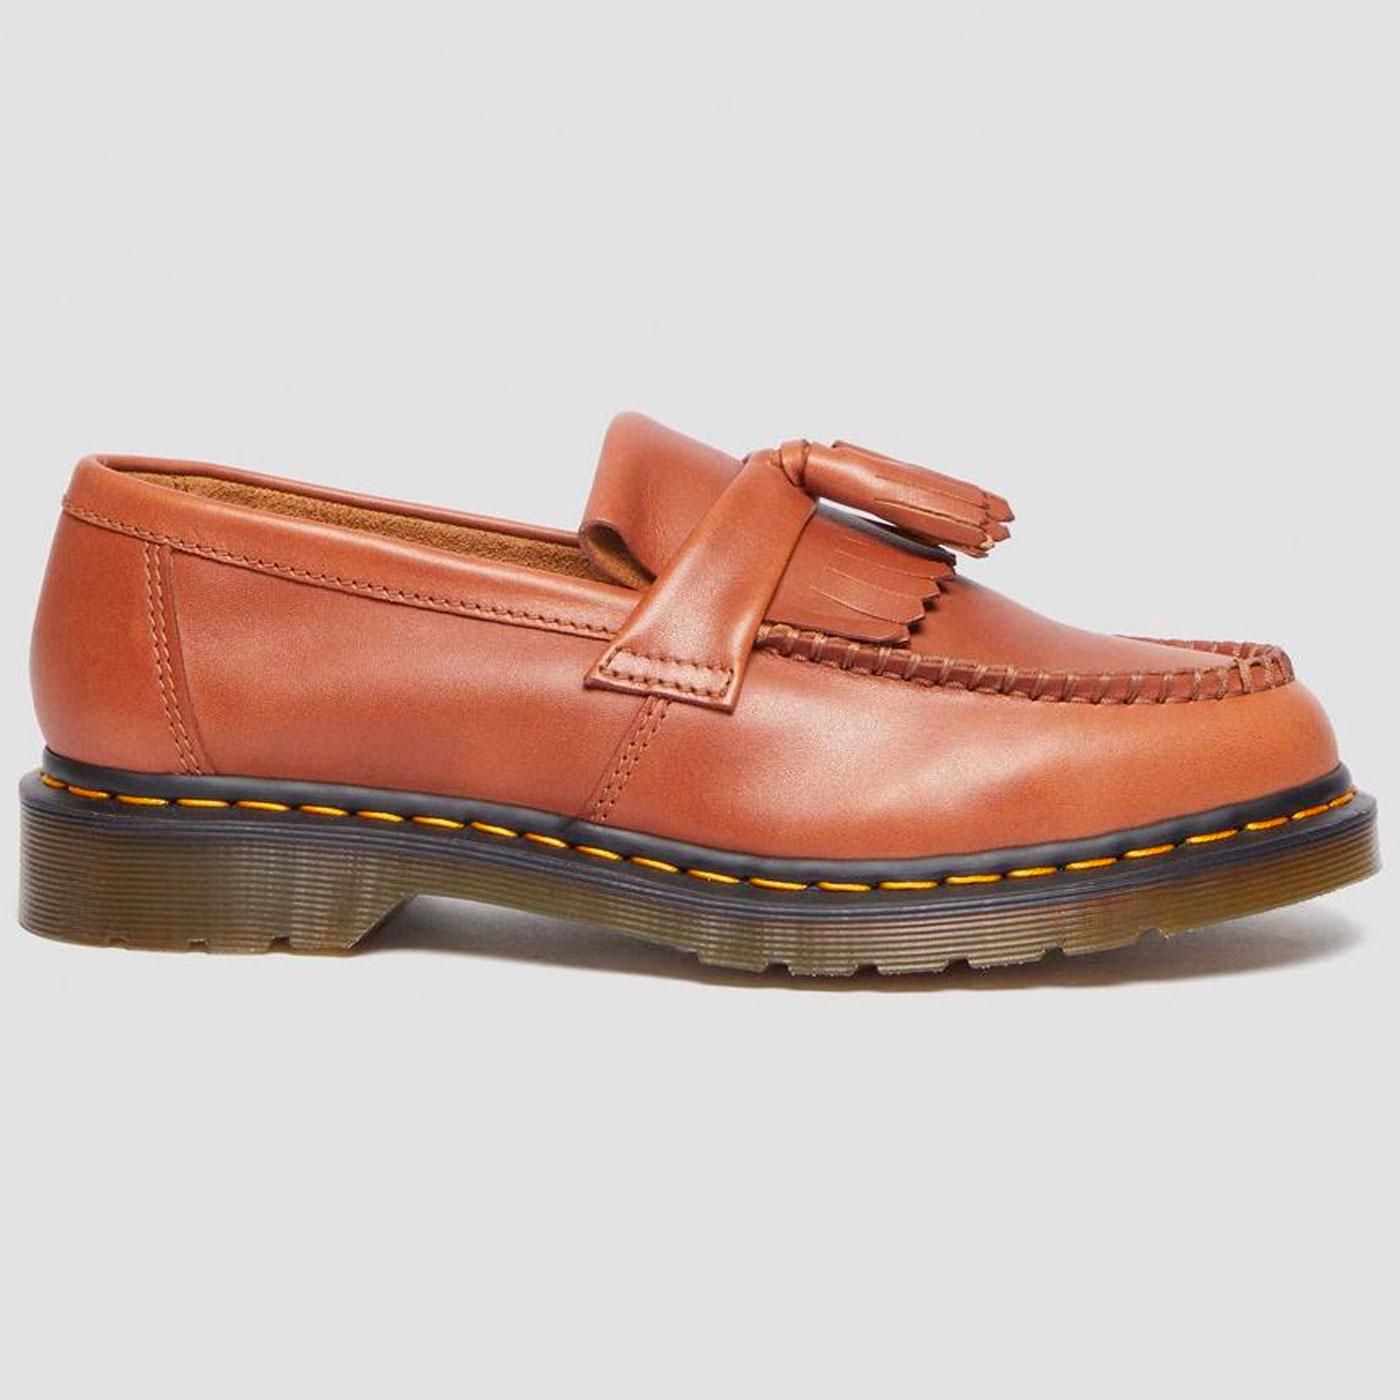 Dr Martens Adrian Retro Leather mod tassel loafers in saddle tan